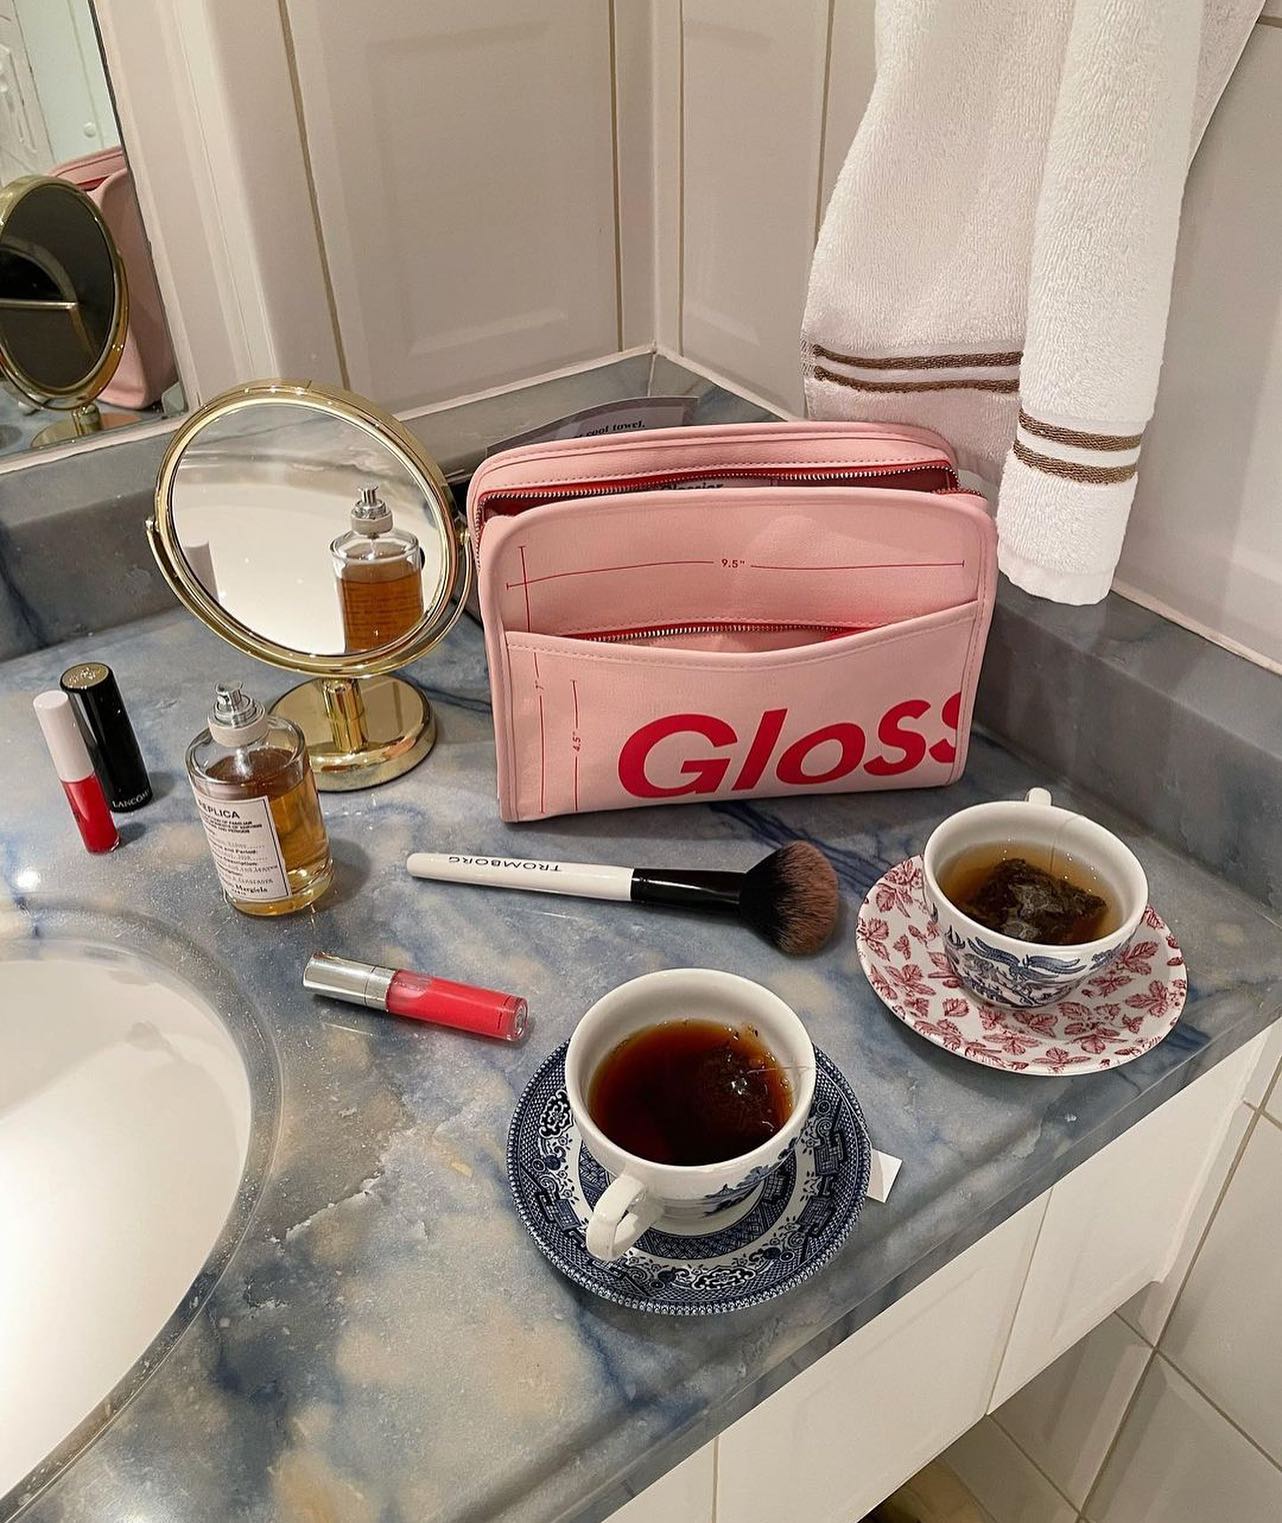 A Glossier makeup bag sits on a bathroom counter top alongside other Glossier products and two cups of tea.